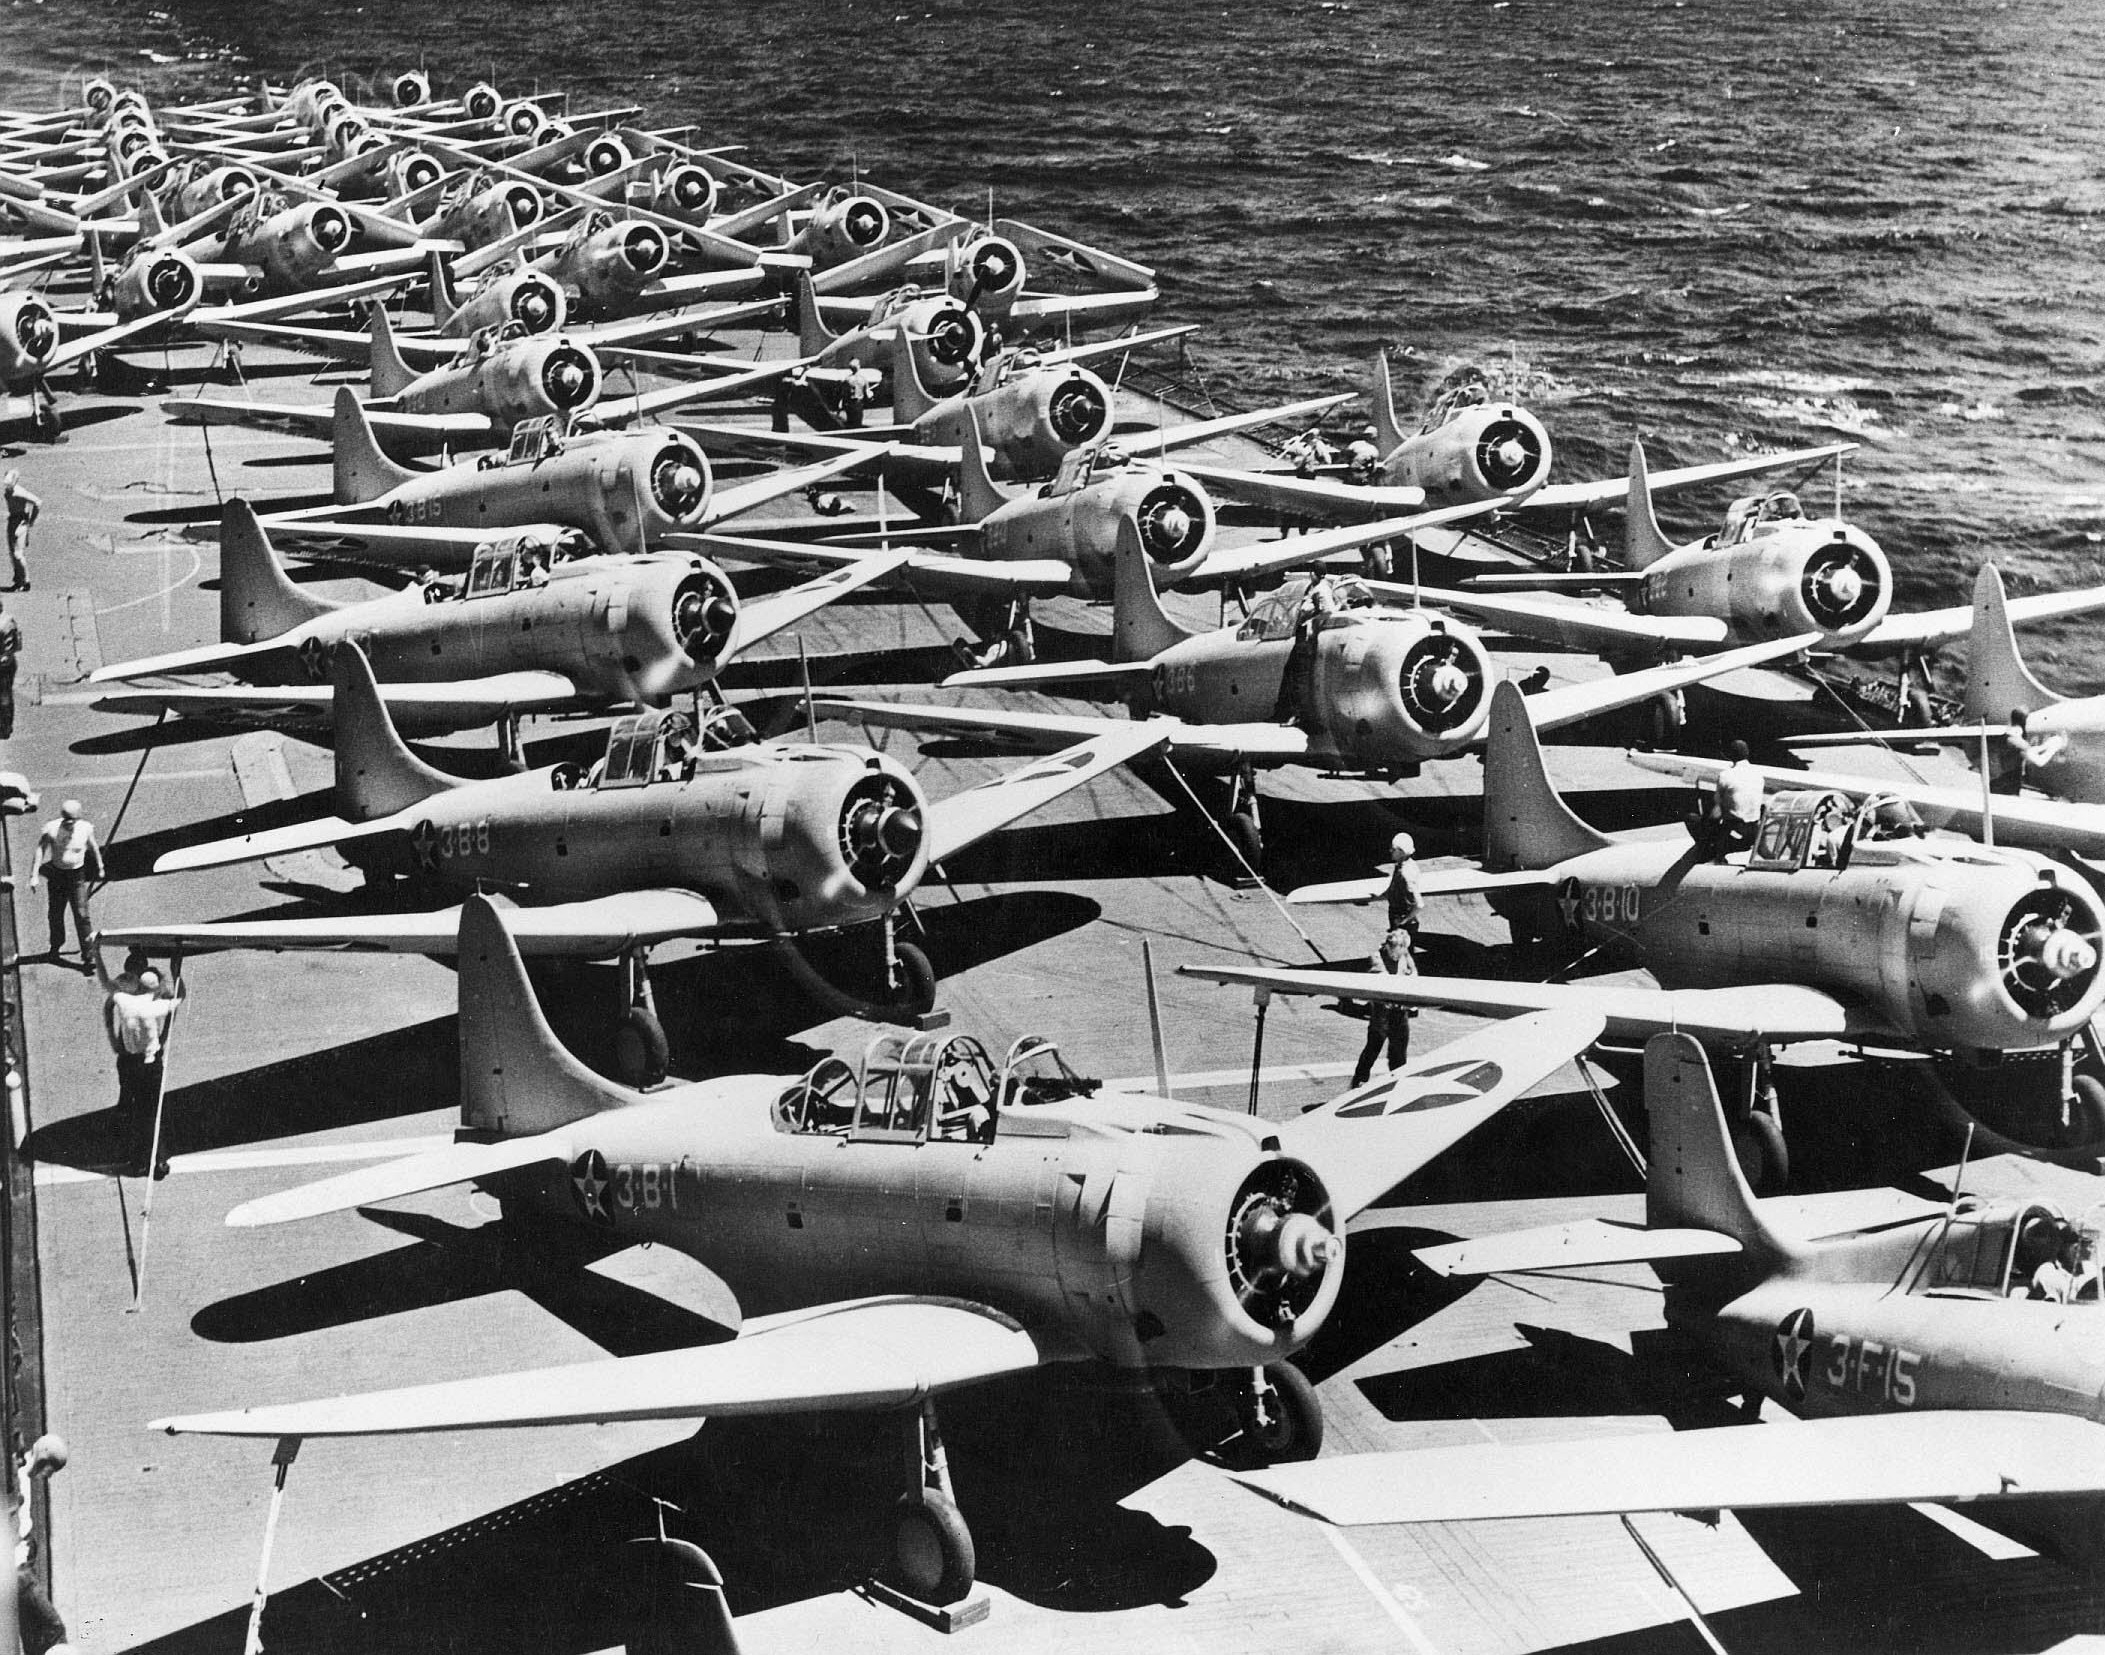 F4F-3 Wildcat (foreground), SBD-3 Dauntless (center forward and background), and TBD-1 Devastator (center rear) aircraft on the flight deck of USS Saratoga, 1941